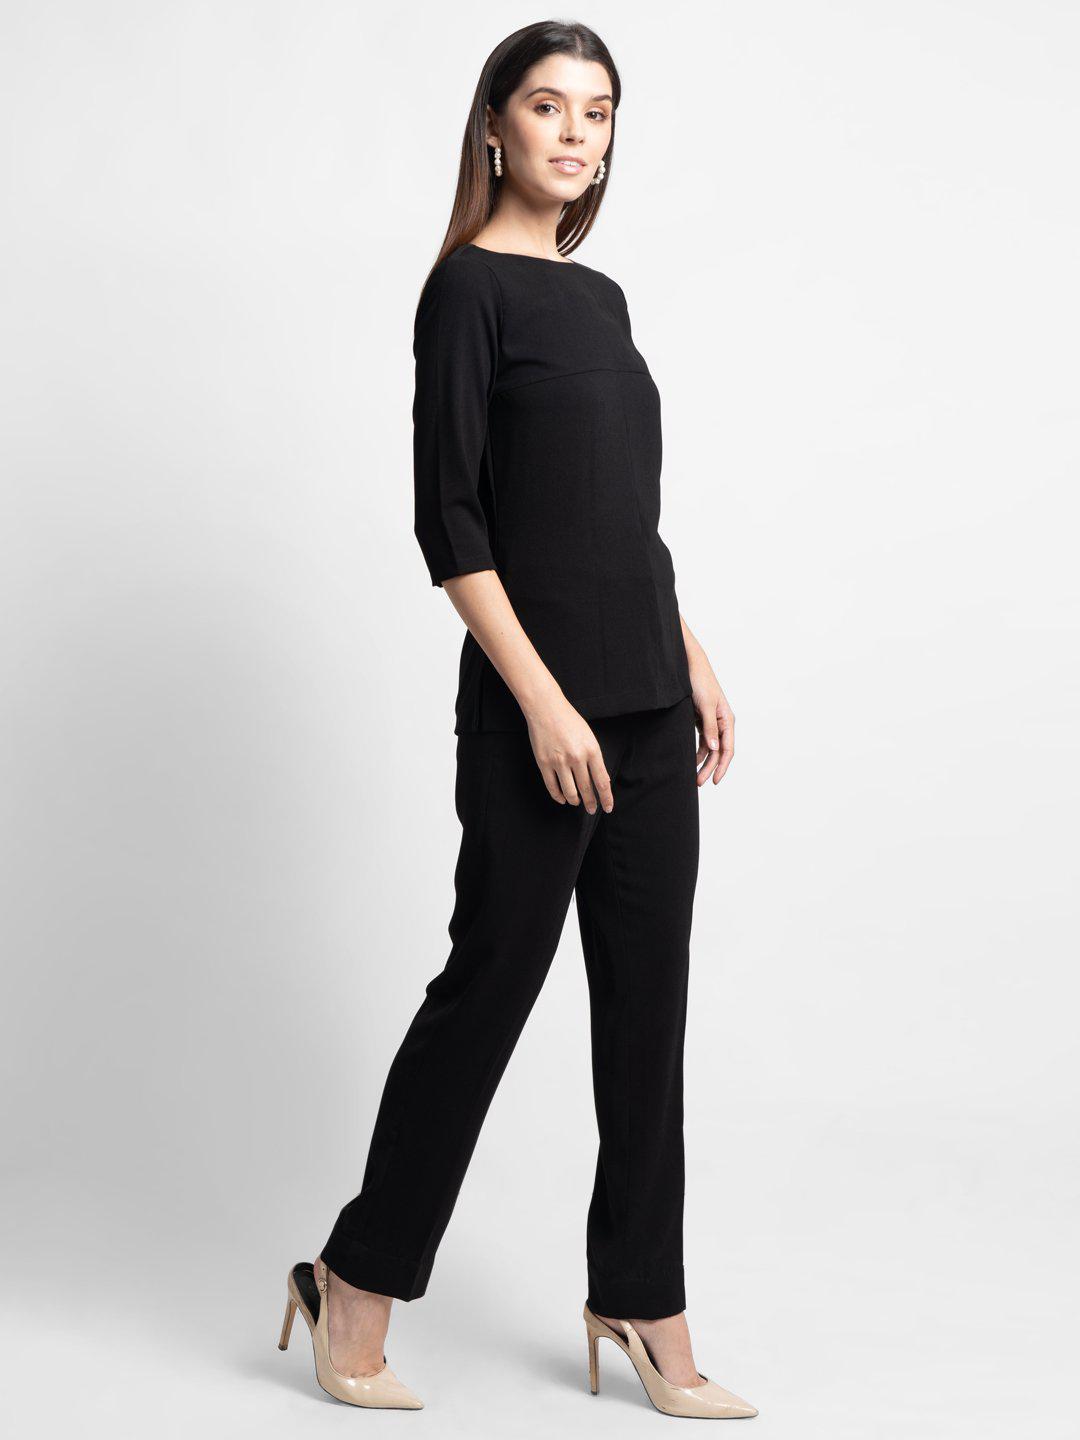 Buy Elegant Black Polyester Solid Bell Bottom Trousers For Women Pack Of 2  Online In India At Discounted Prices